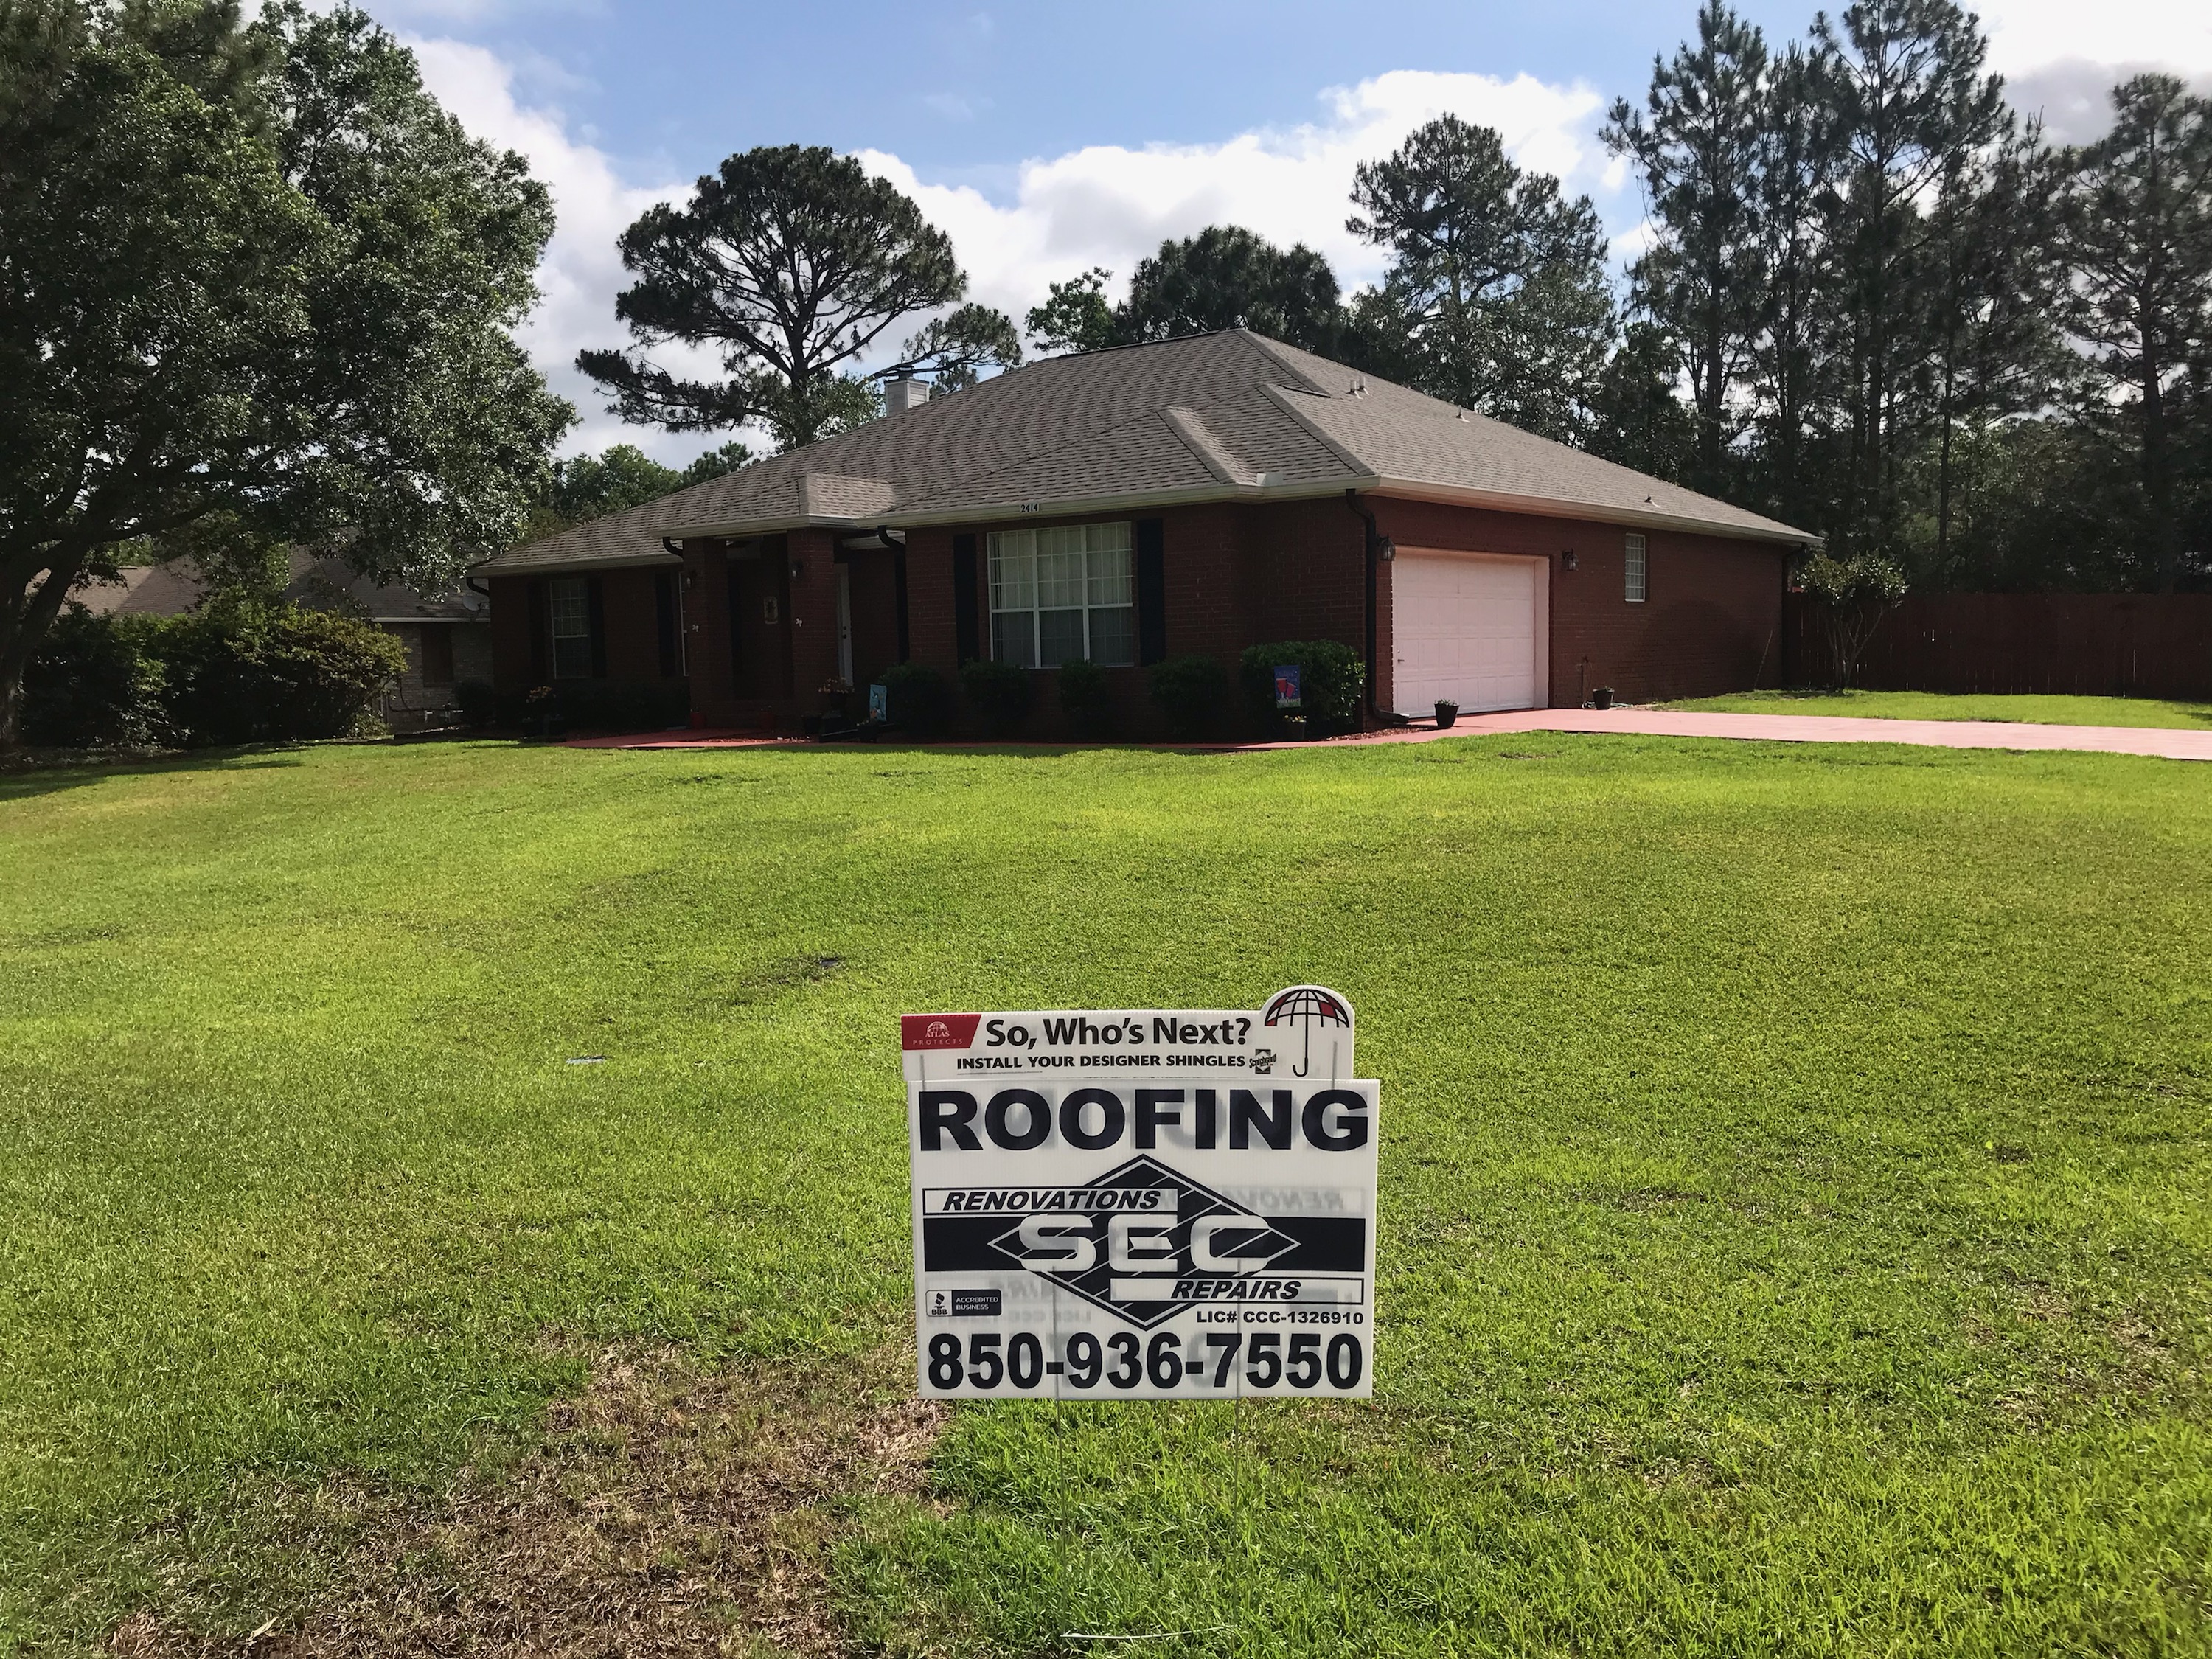 bay county roofing